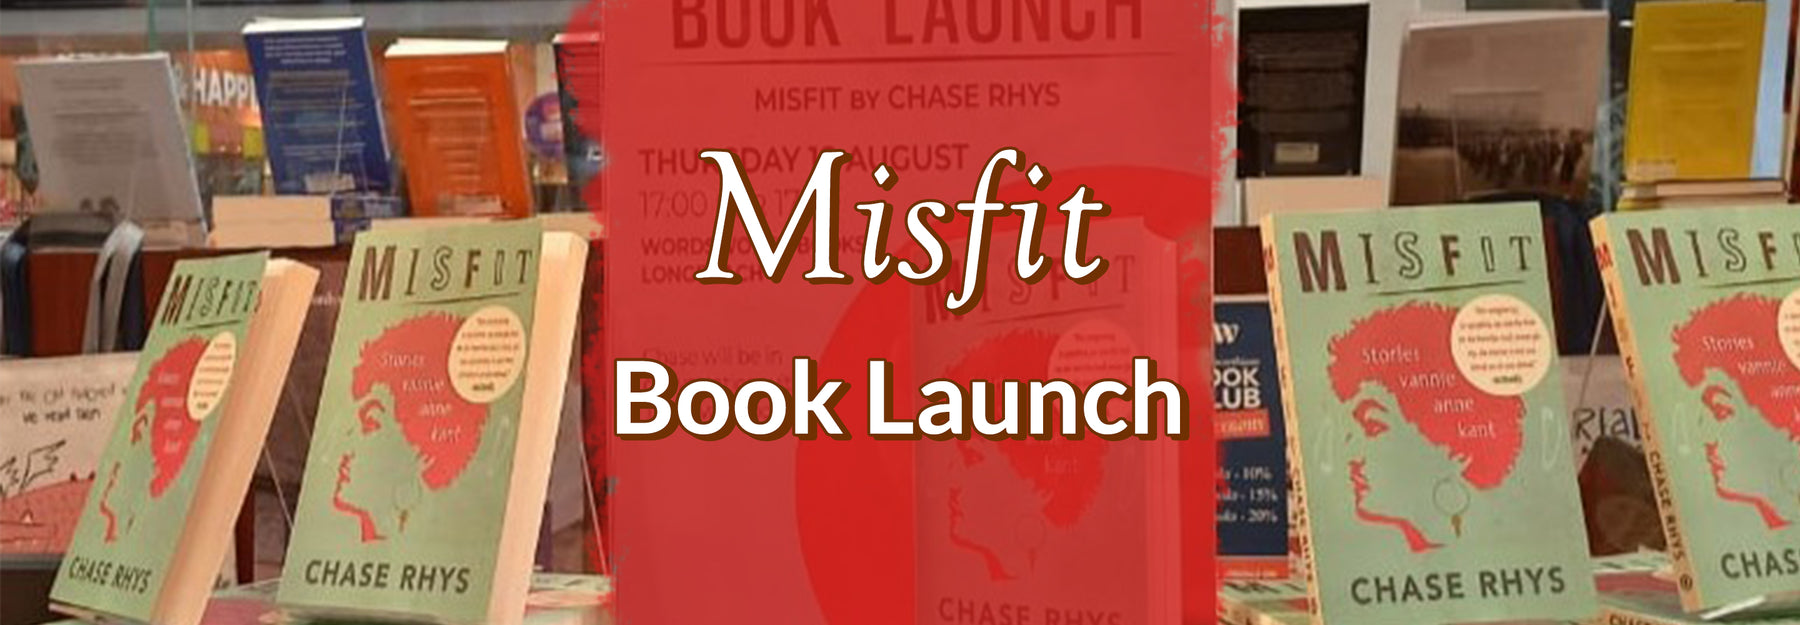 Misfit book launch with Chase Rhys at Wordsworth Longbeach